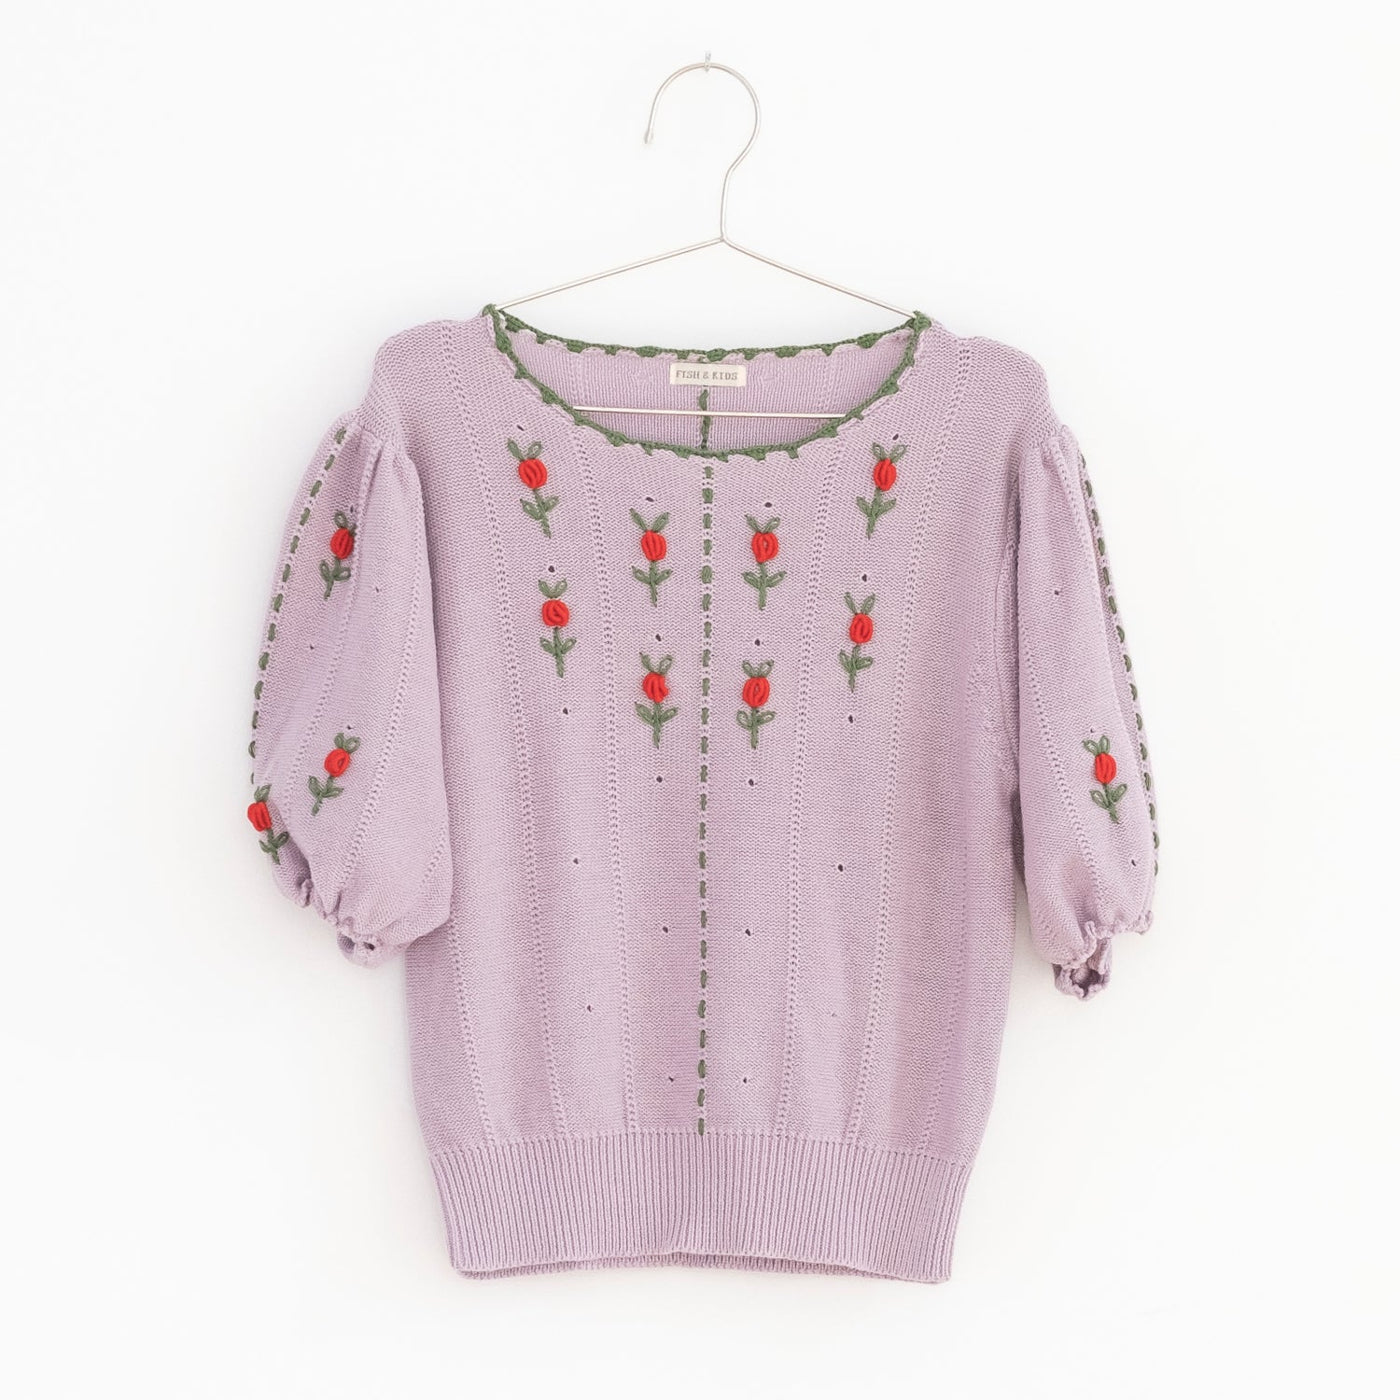 Lilac Balloon Sleeves Top by Fish & Kids - Petite Belle